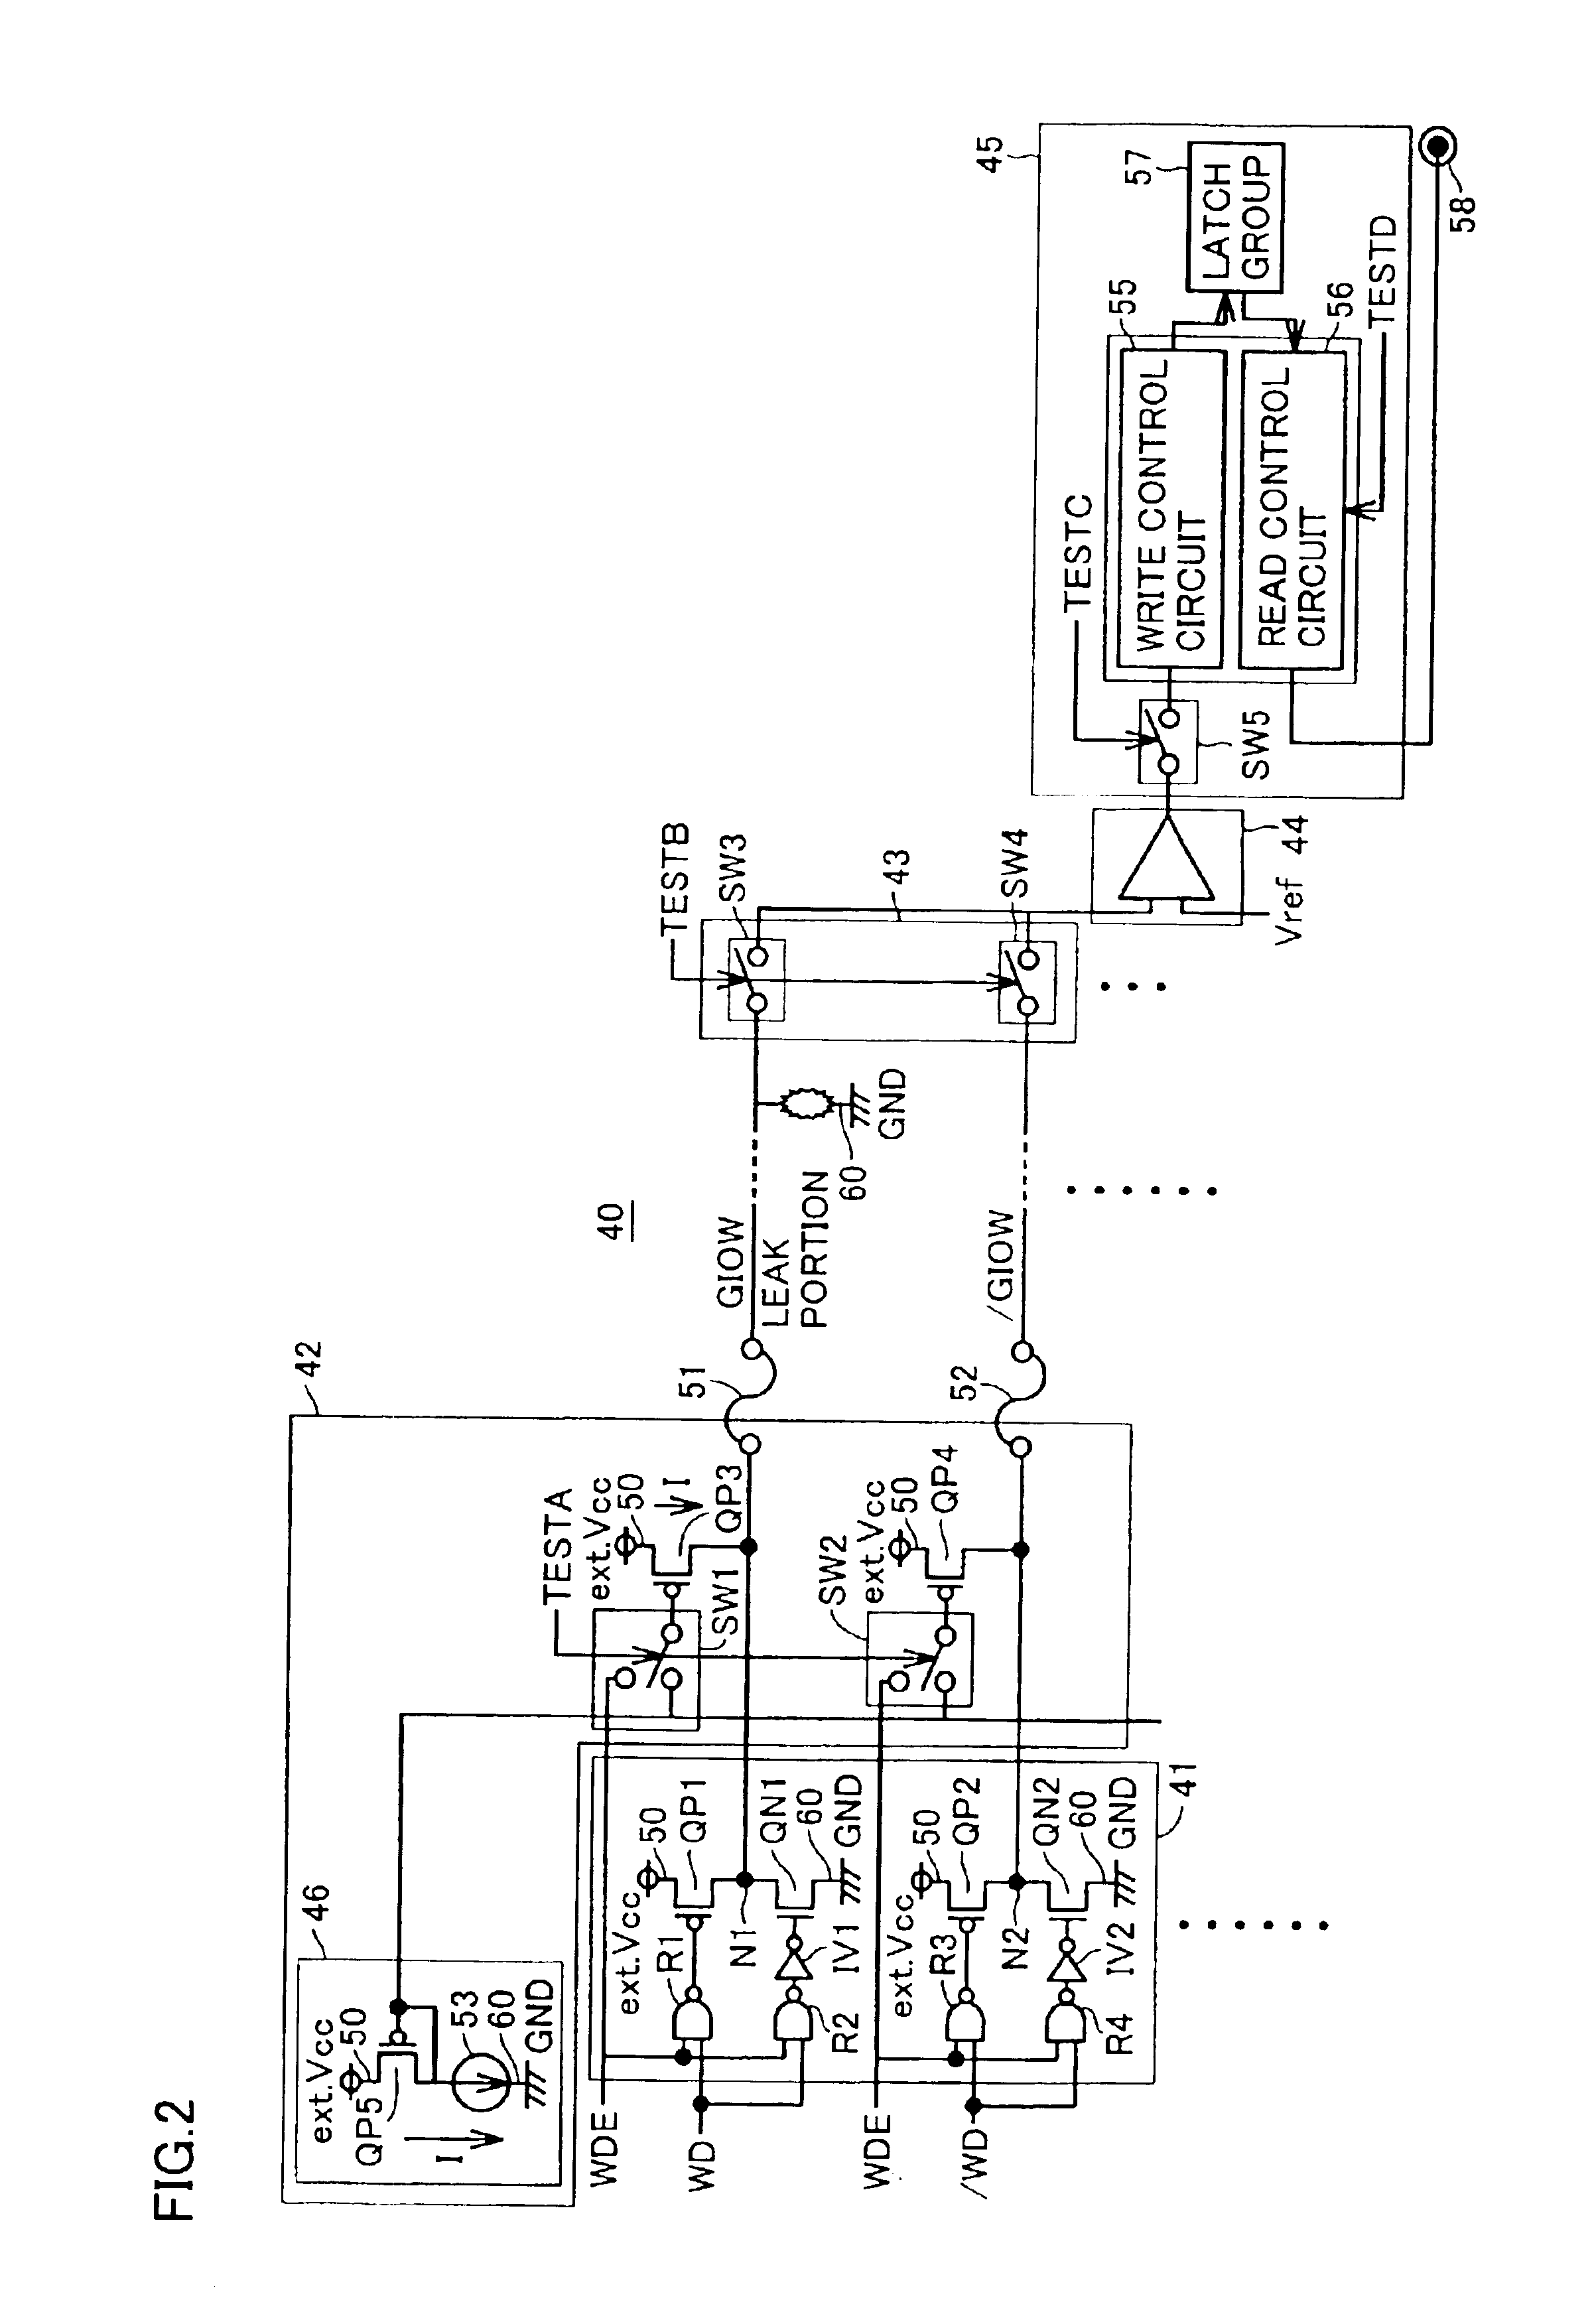 Semiconductor memory device having a plurality of signal lines for writing and reading data